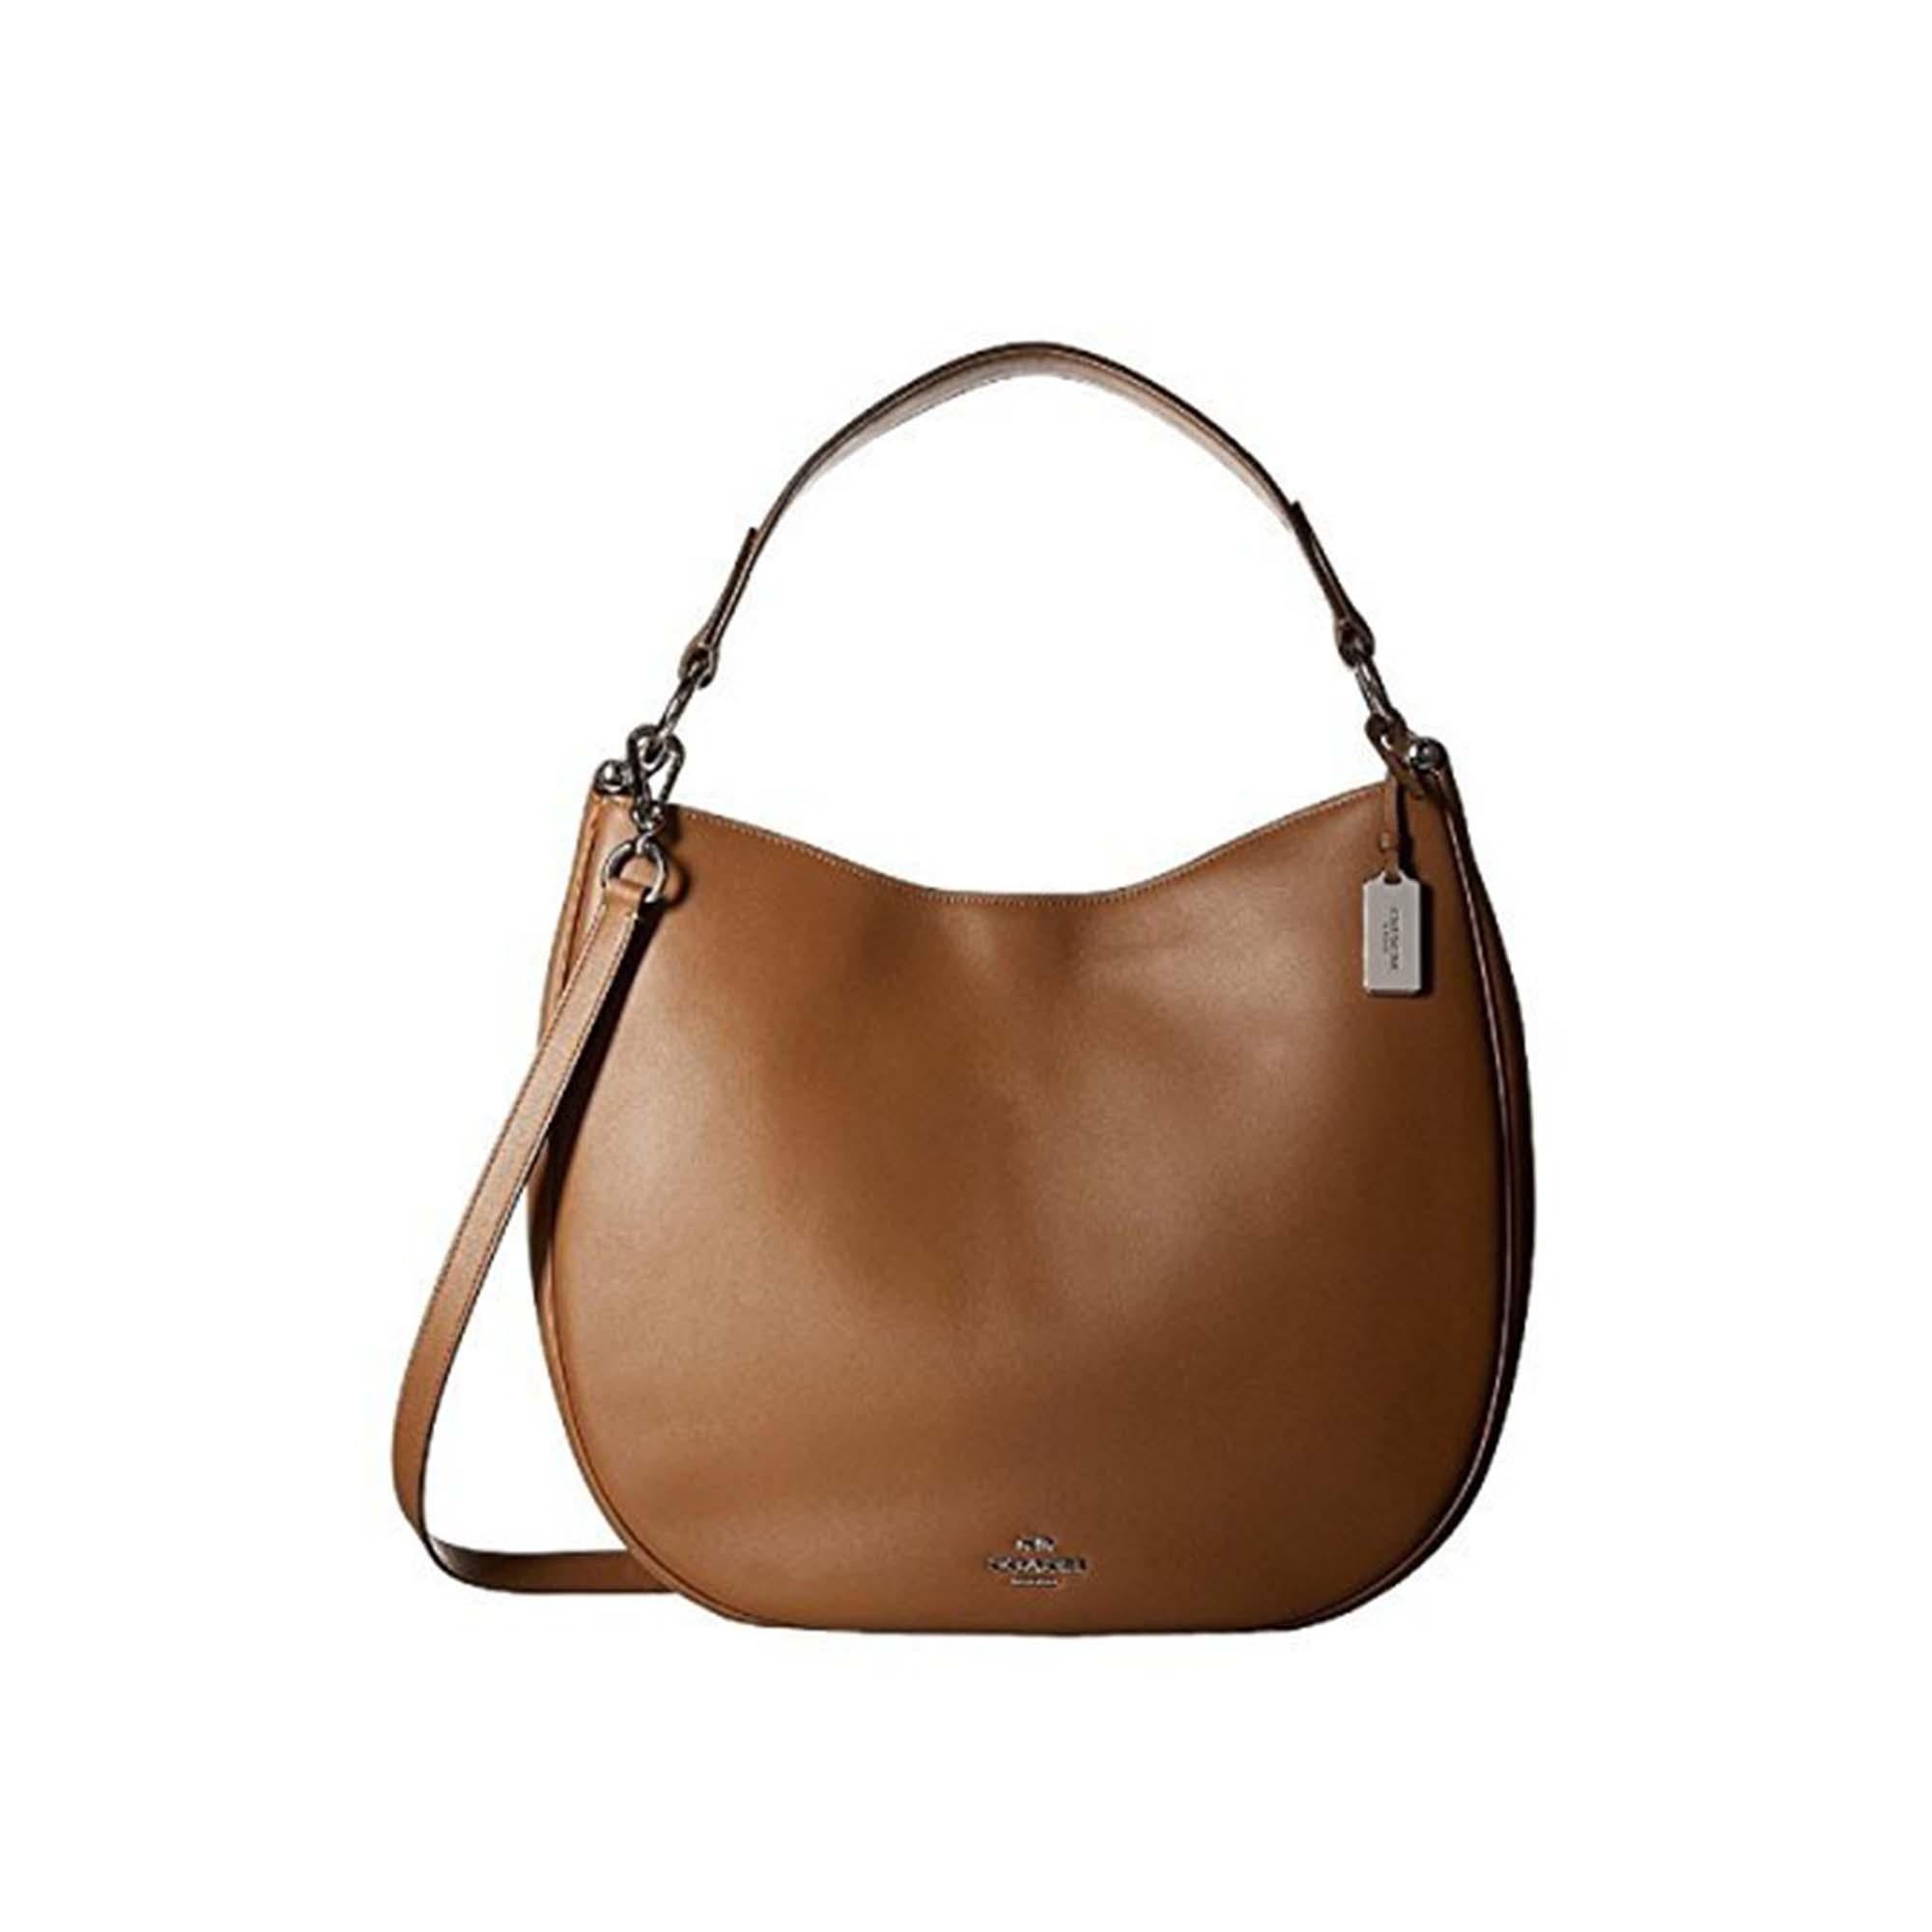 Comes without dust bag. Saddle color. Silver tone hardware. 100% Genuine Leather. Chic and slouchy in supple glove-tanned leather, this graceful silhouette is finished with dressy hardware and an adjustable strap for multiple wearing options. Zip